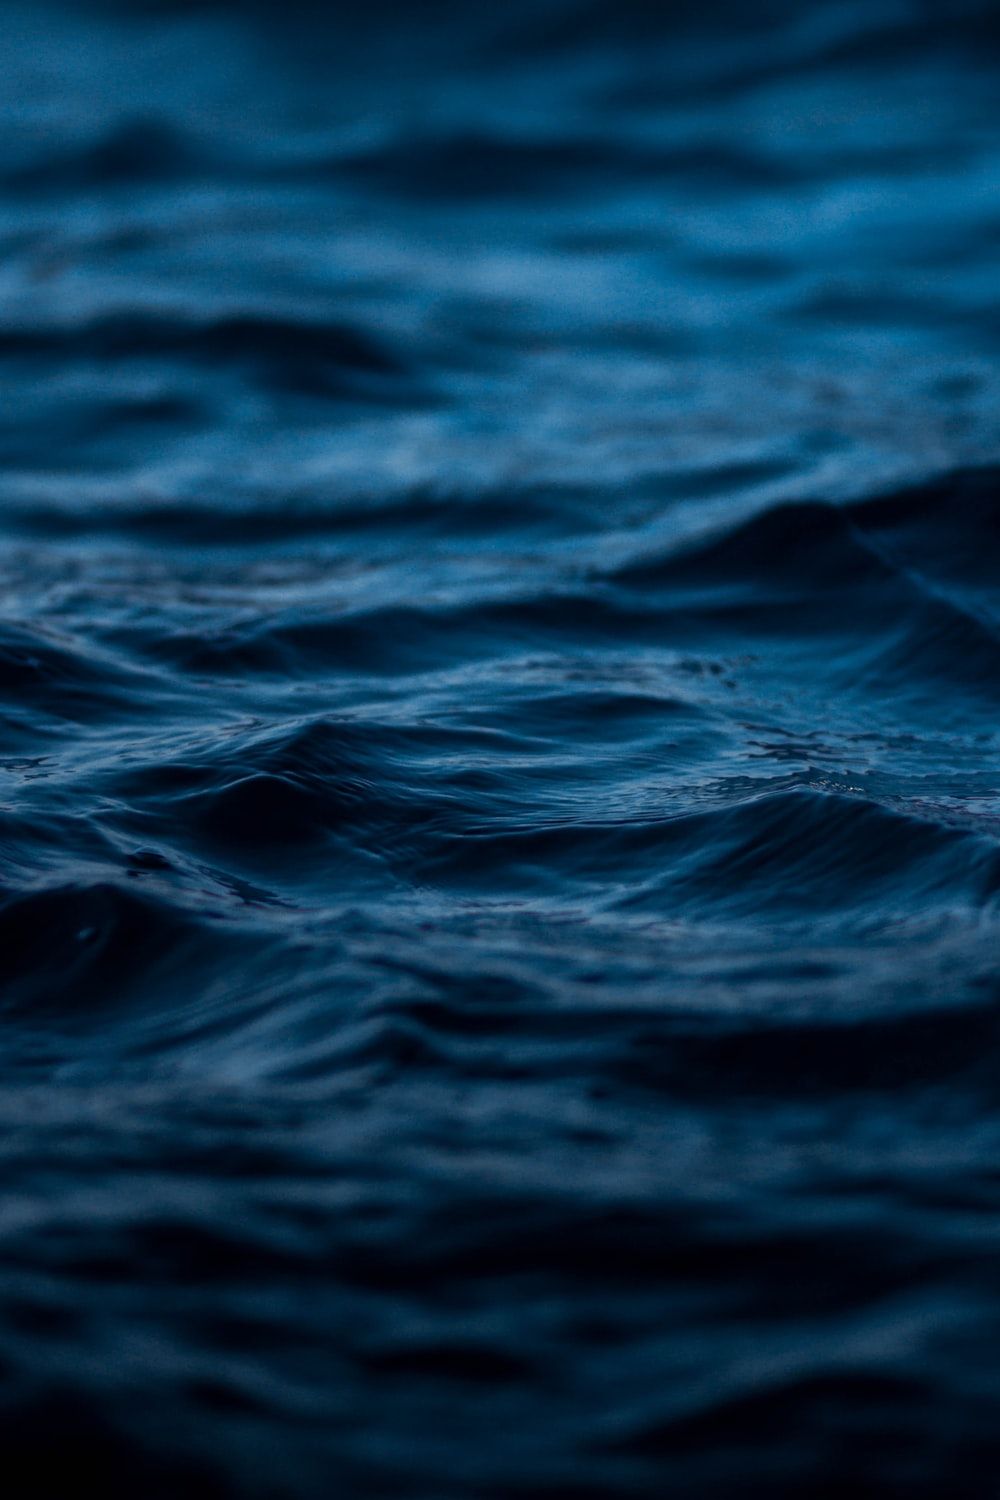 Dark Blue Water Picture. Download Free Image